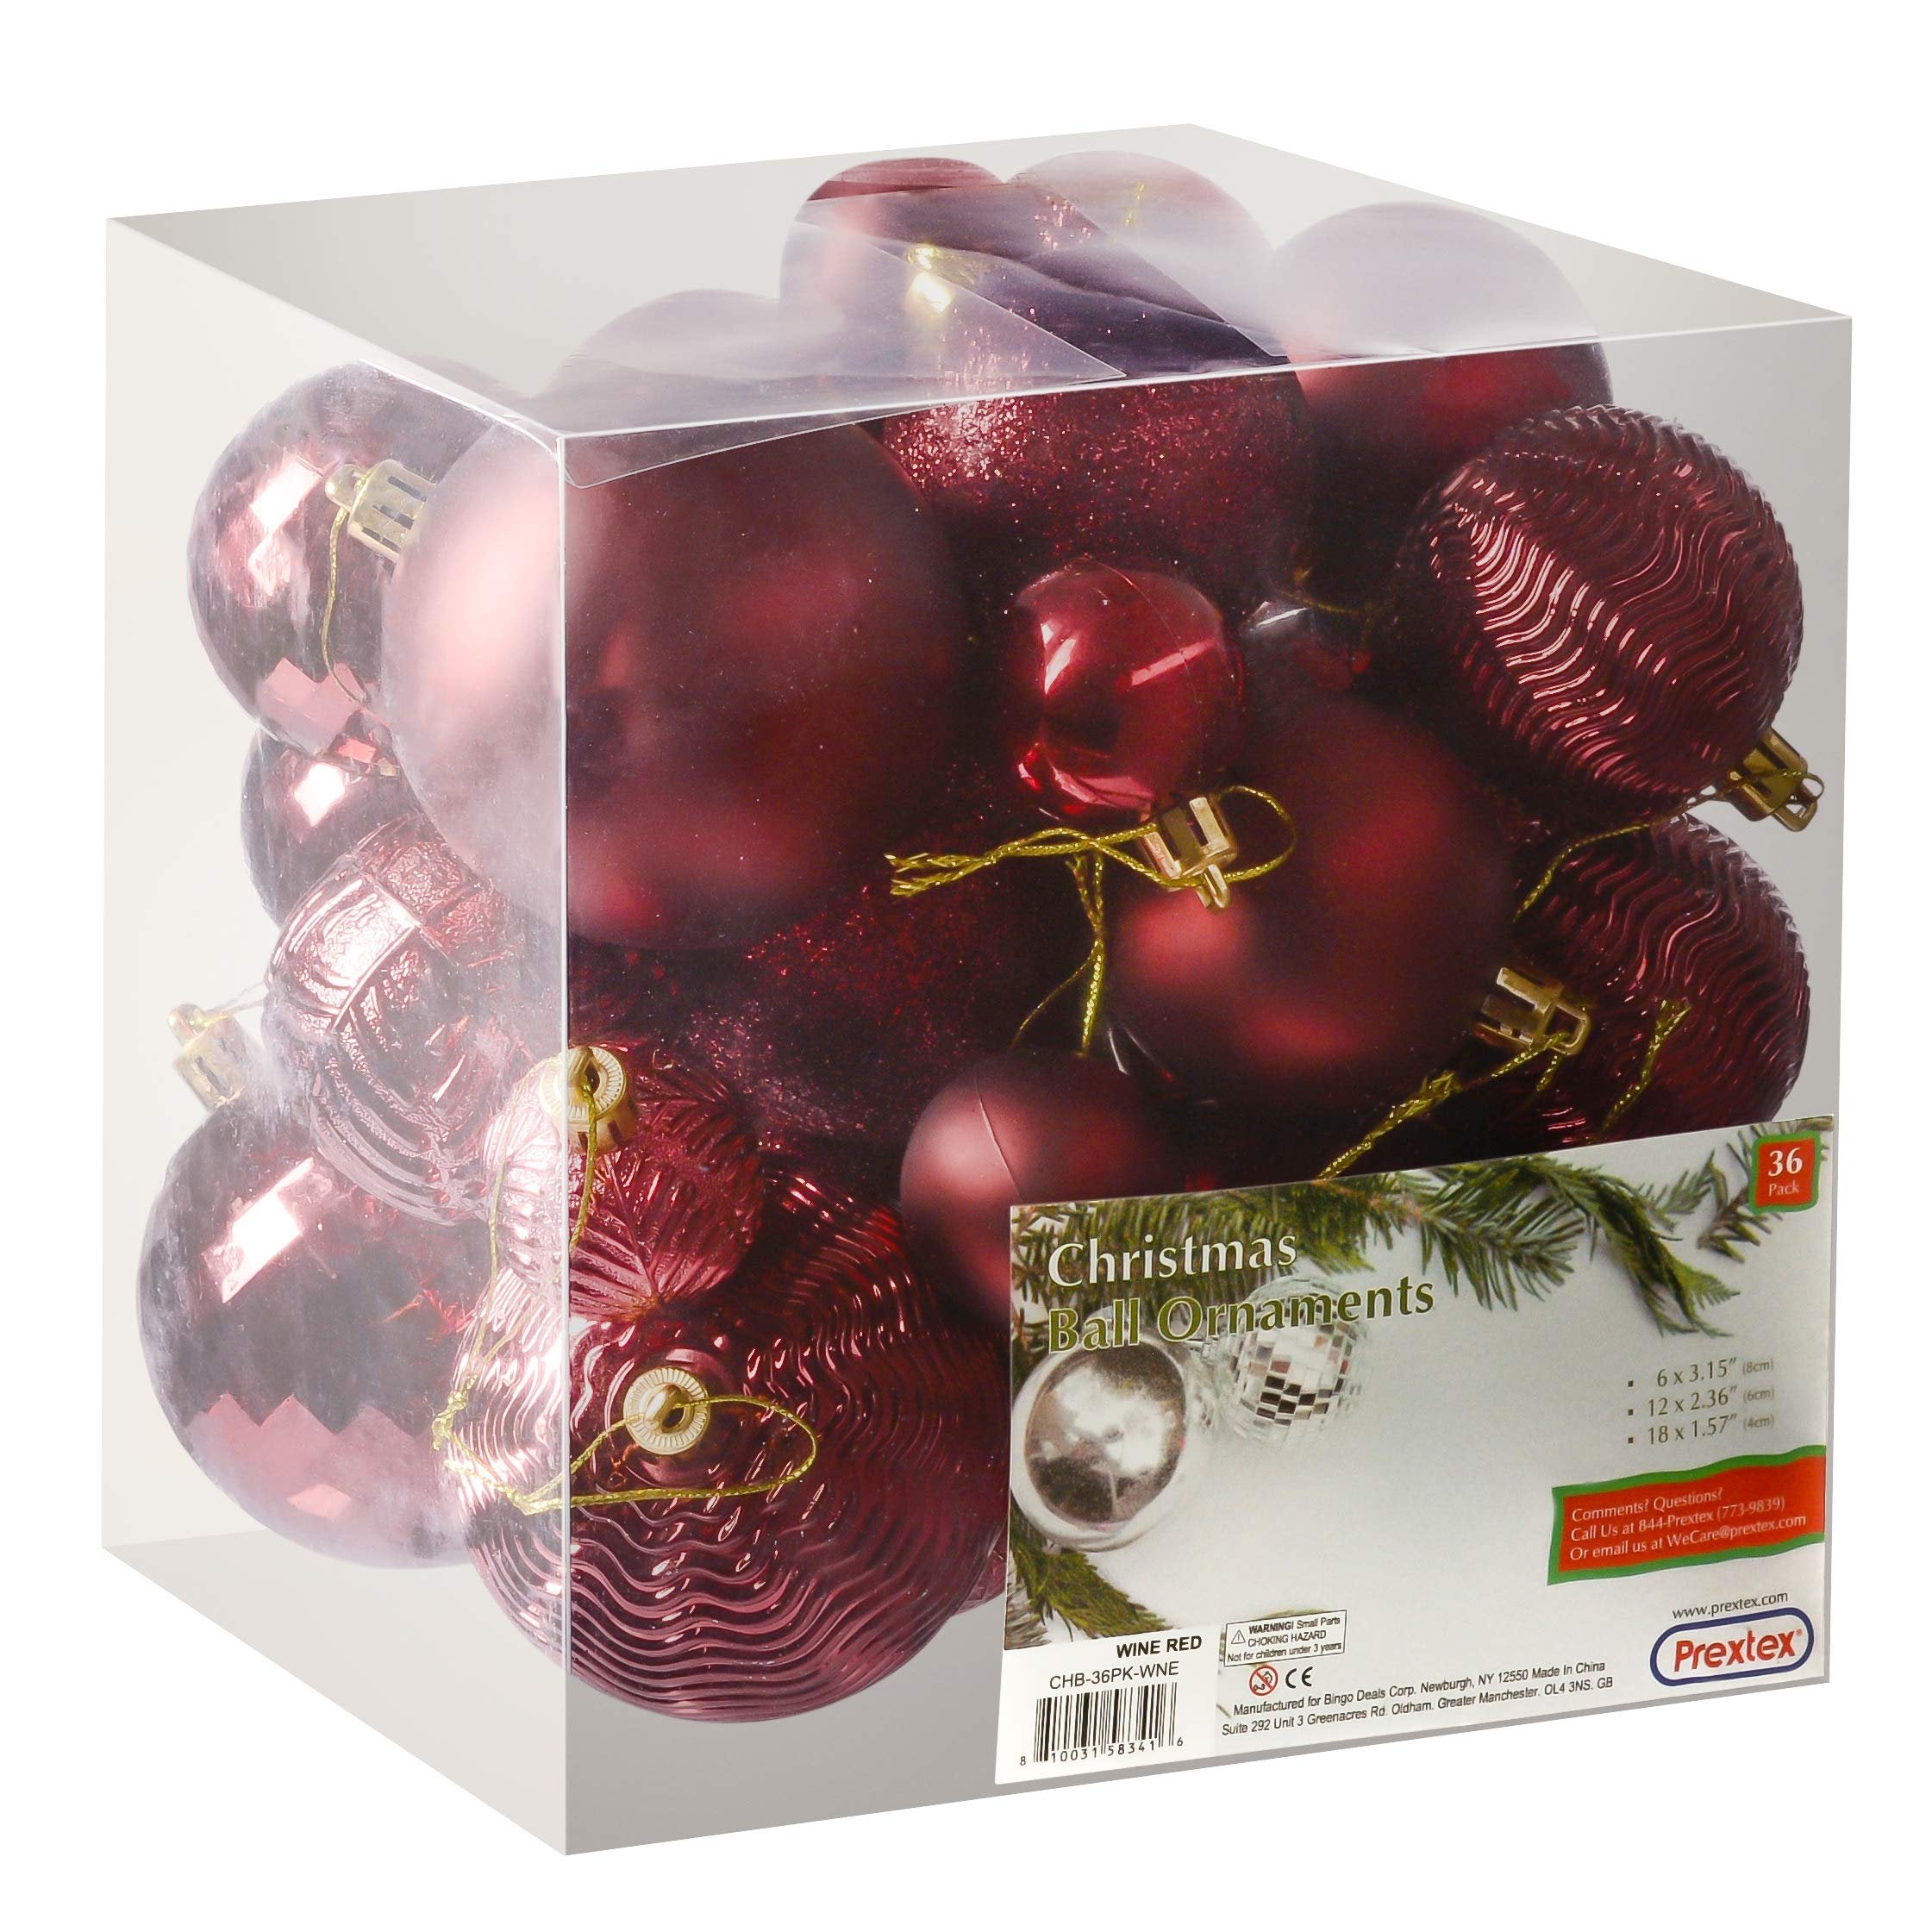 PREXTEX Christmas Tree Ornaments - Wine Red Christmas Ball Ornaments Set for Christmas, Holiday, Wreath & Party Decorations (36 pcs - Small, Medium, Large) Shatterproof - Red Christmas Ornaments